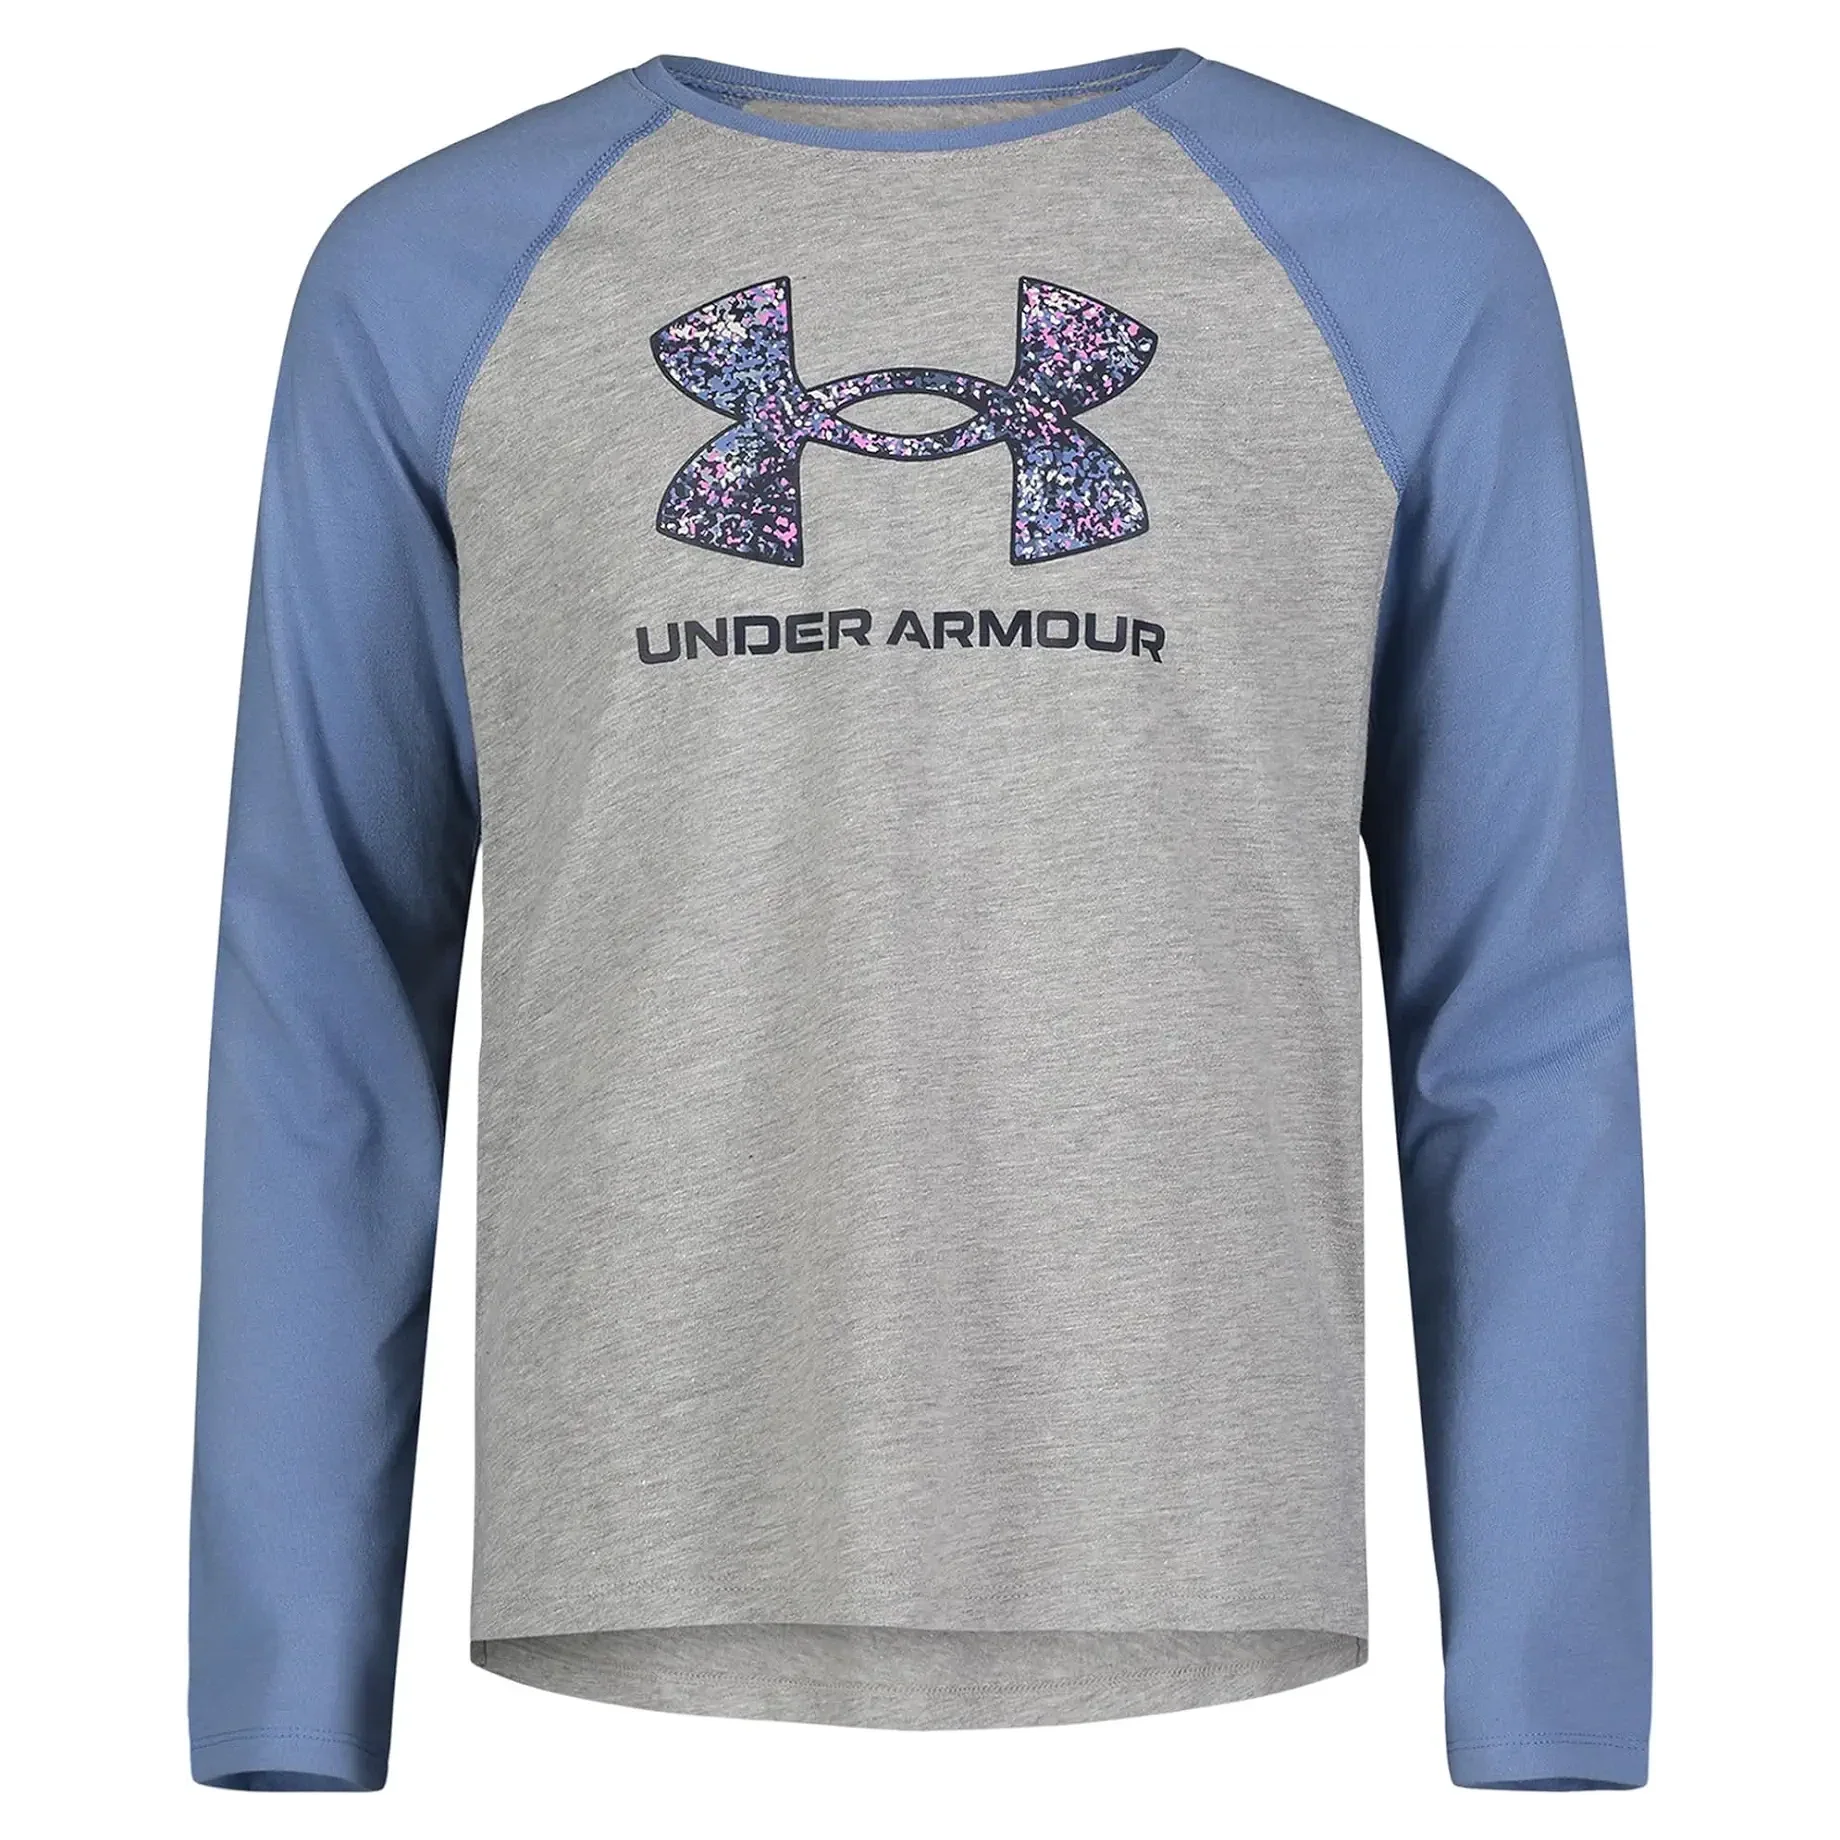 Under Armour Youth Girl's UA Cloud Speckle Icon Tee - Mod Gray-UNDER ARMOUR-Little Giant Kidz